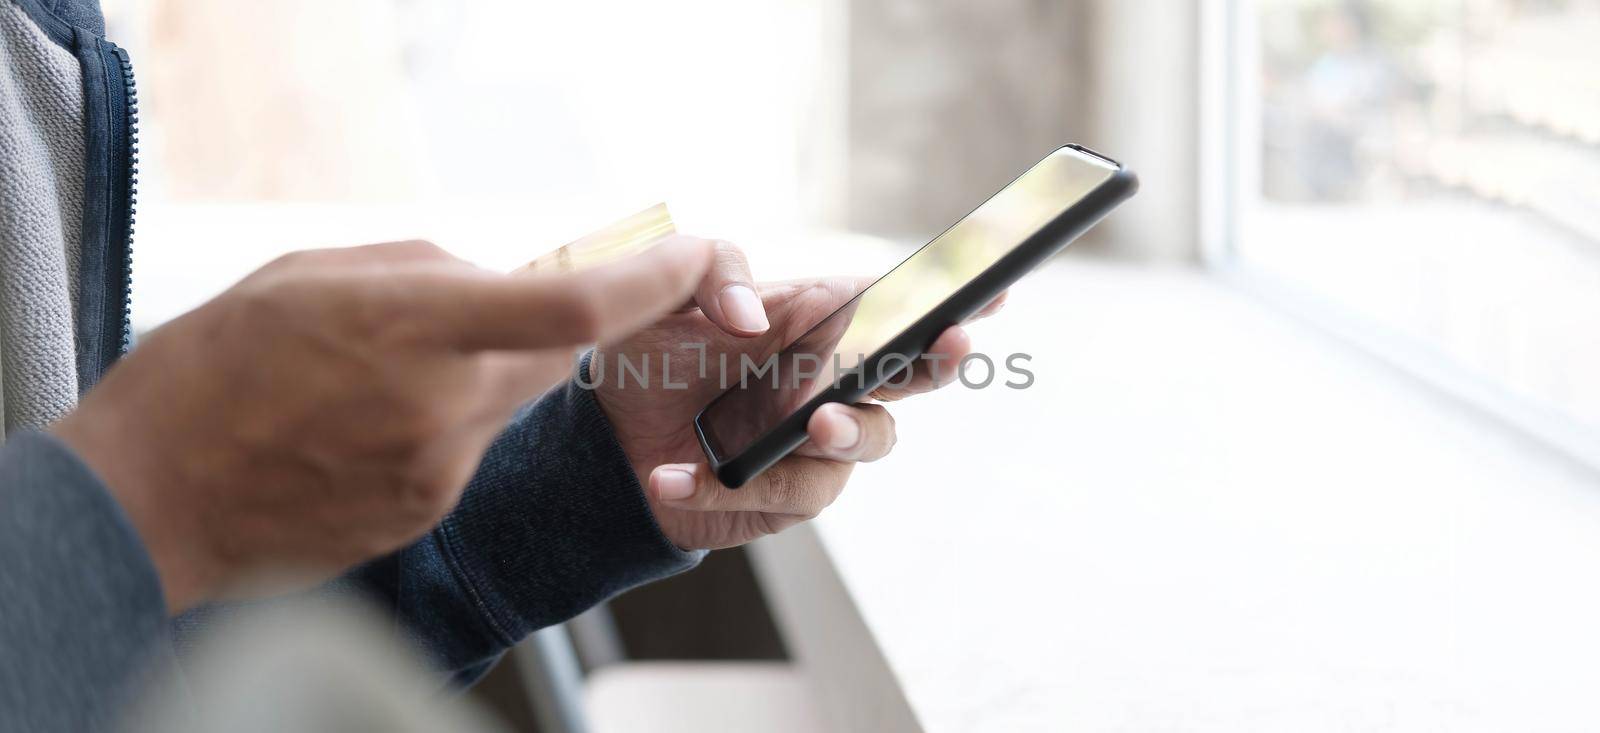 Online payment,Man's hands holding a credit card and using smart phone for online shopping.